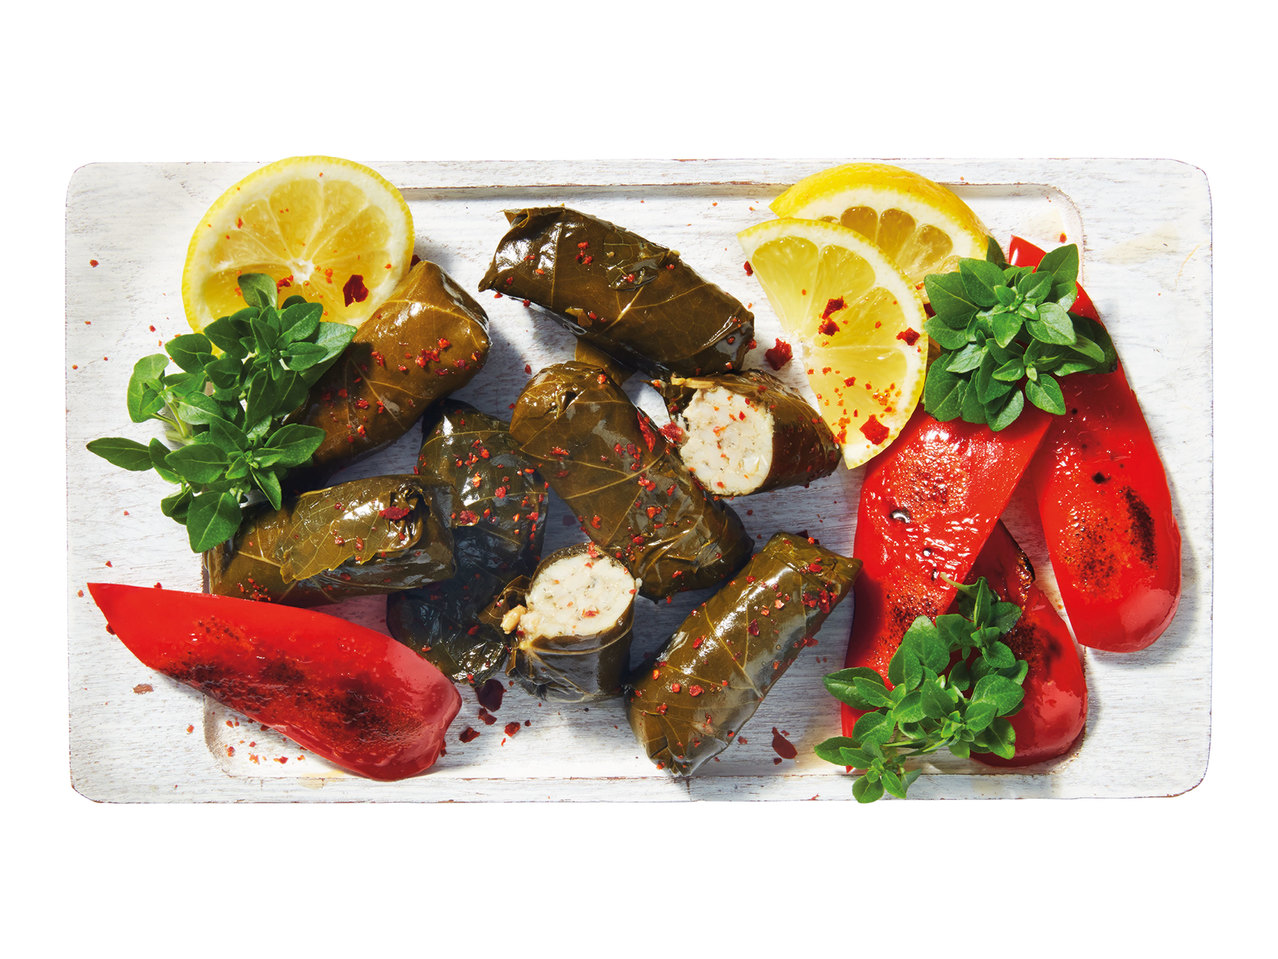 Eridanous Vine Leaves Stuffed with Rice1